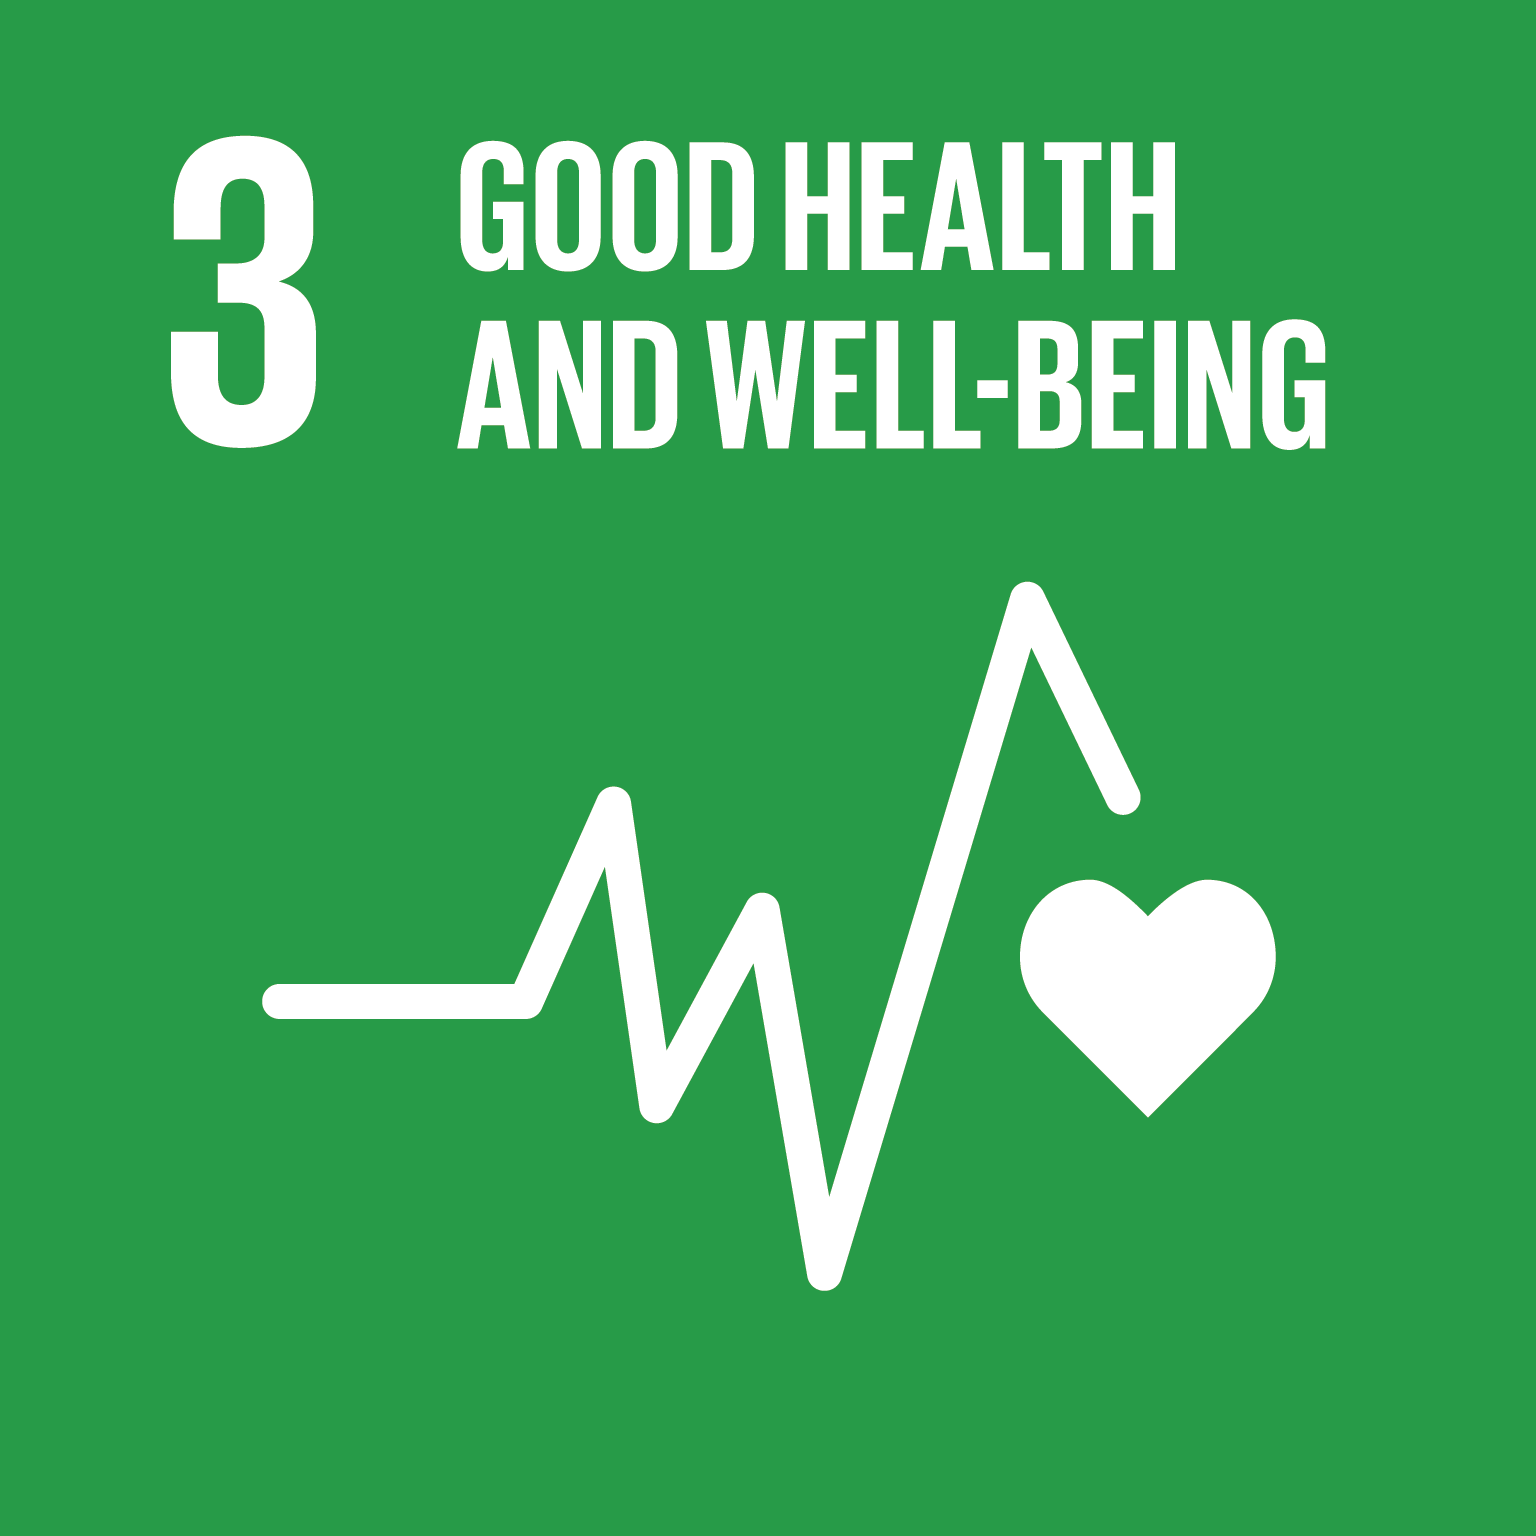 SDG03: Good Health and Well-Being